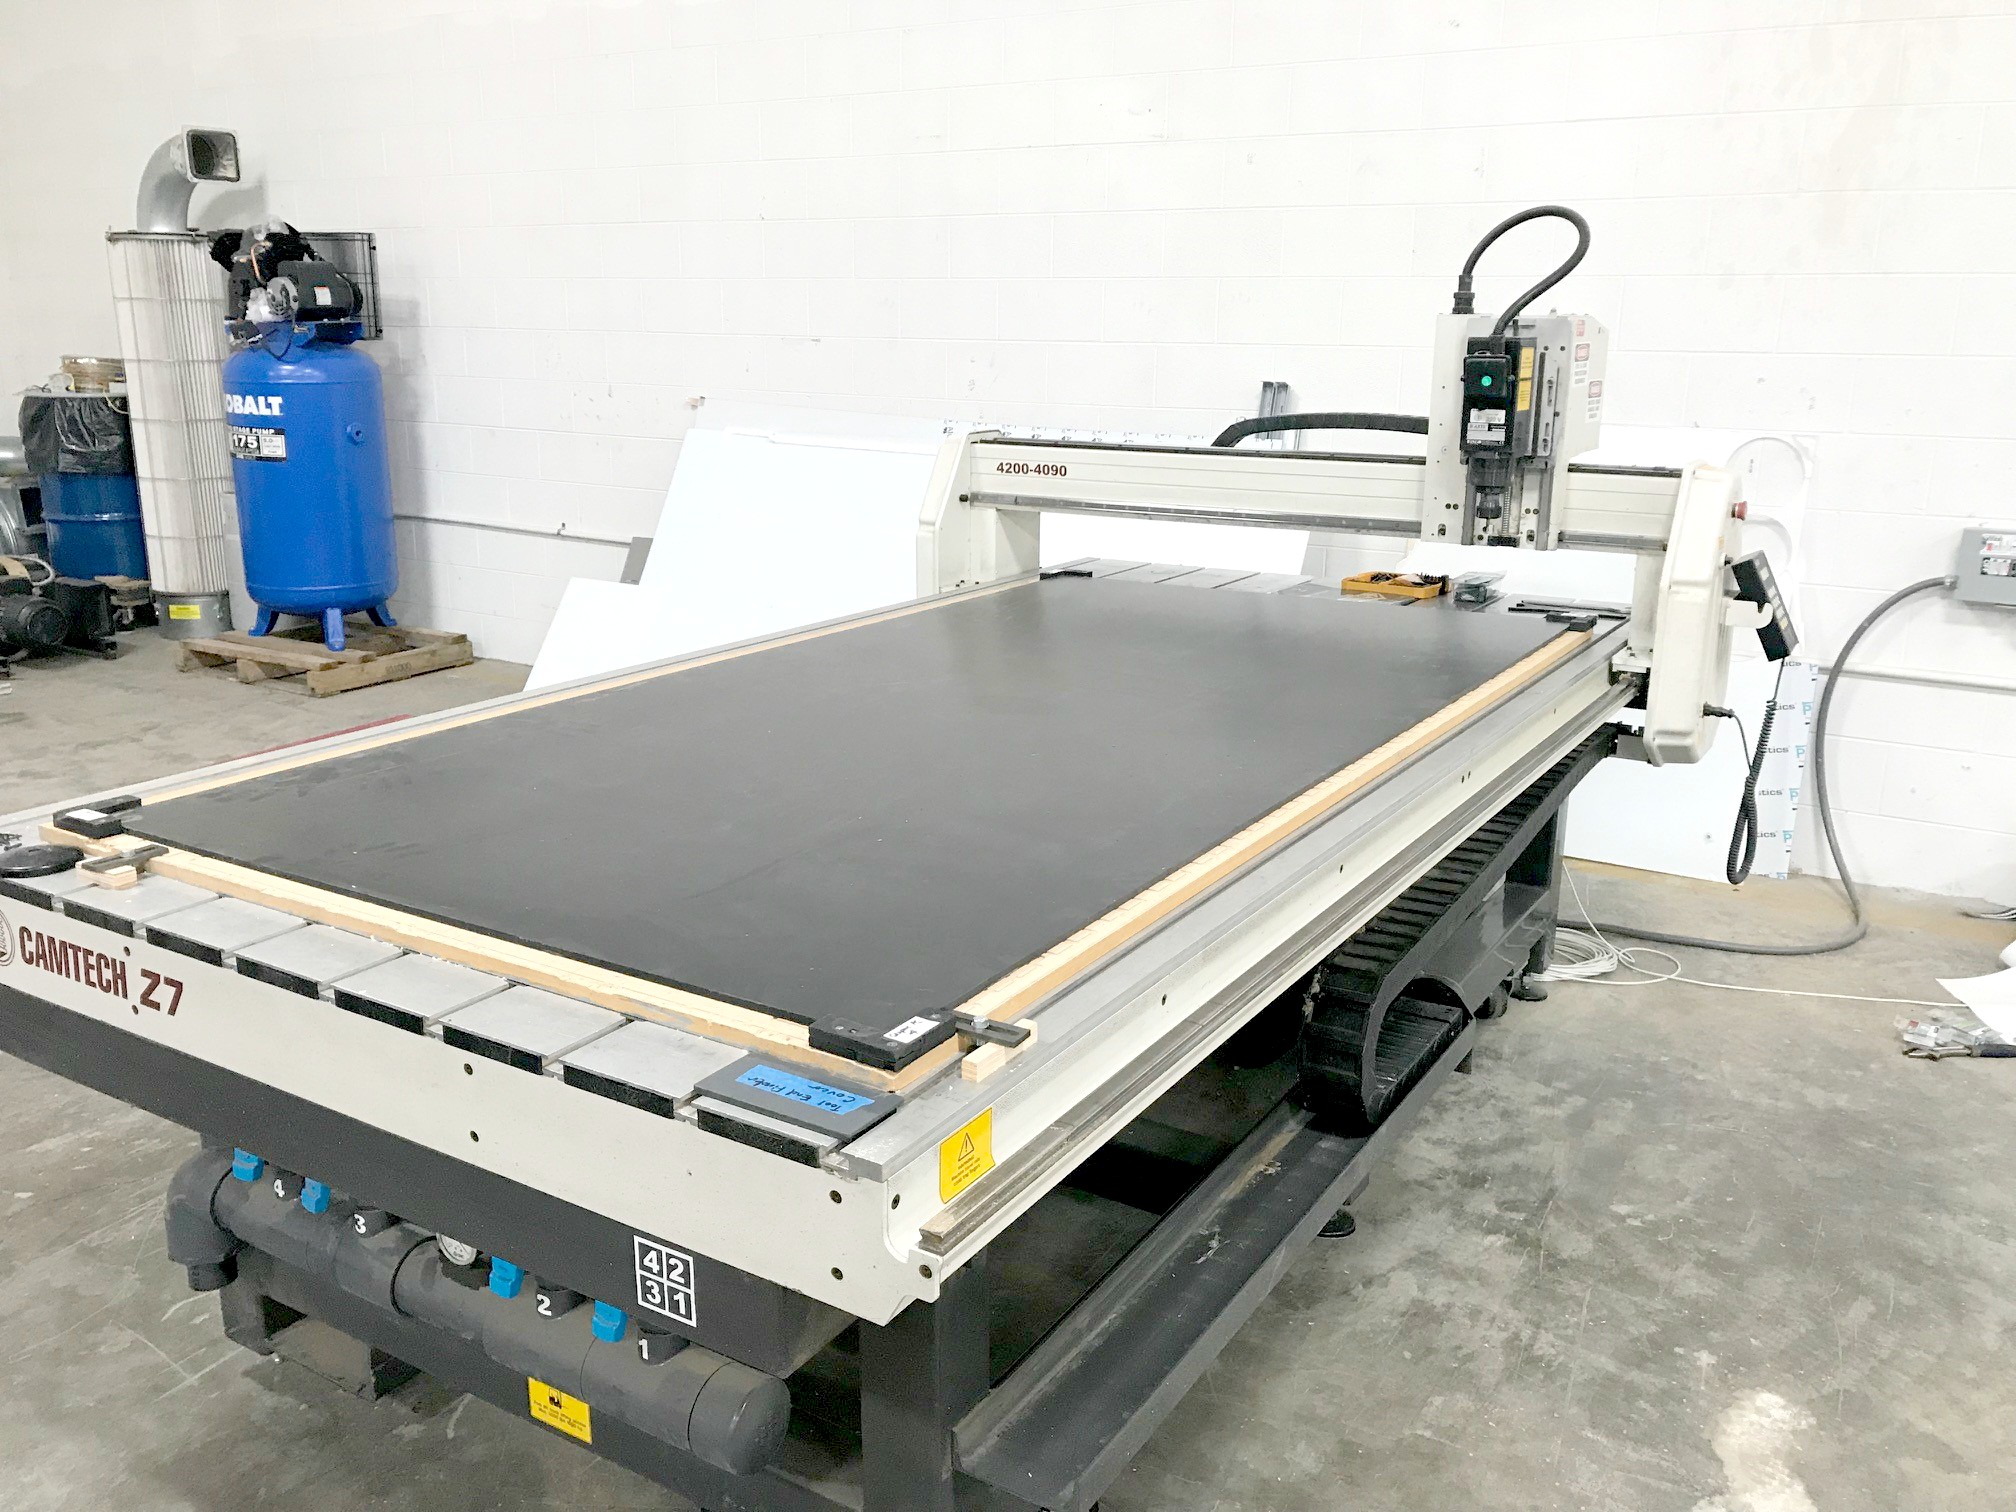 AXYZ Z7 Camtech 4′ x 8′ CNC Router (Used) Item # UR-23 (Tennessee)